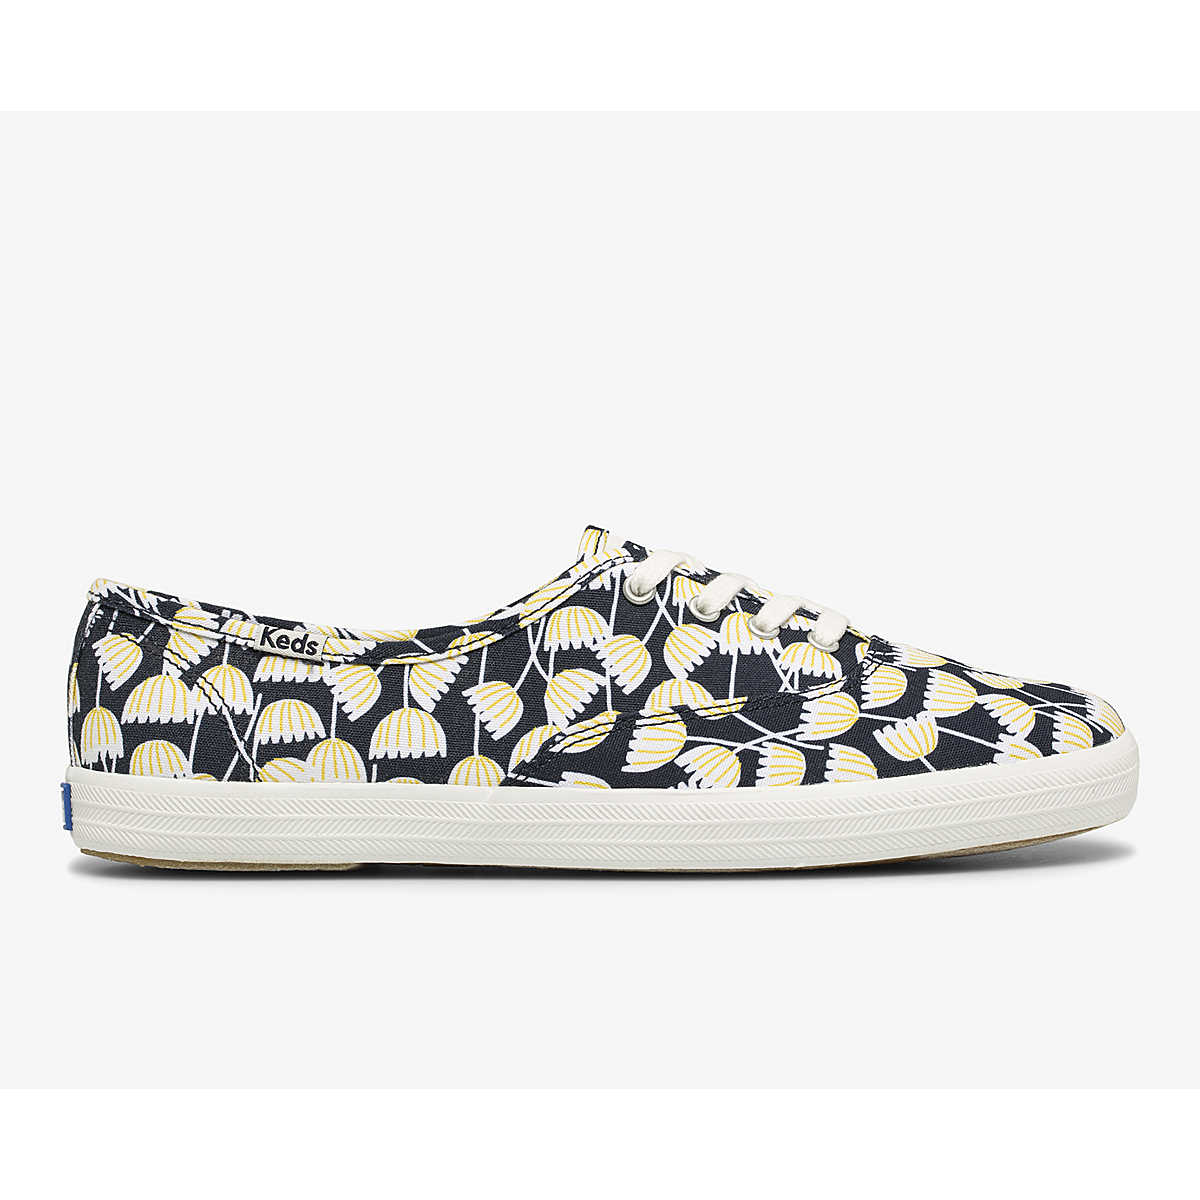 Keds Washable Champion Feat. Organic Cotton Floral In Navy Multi